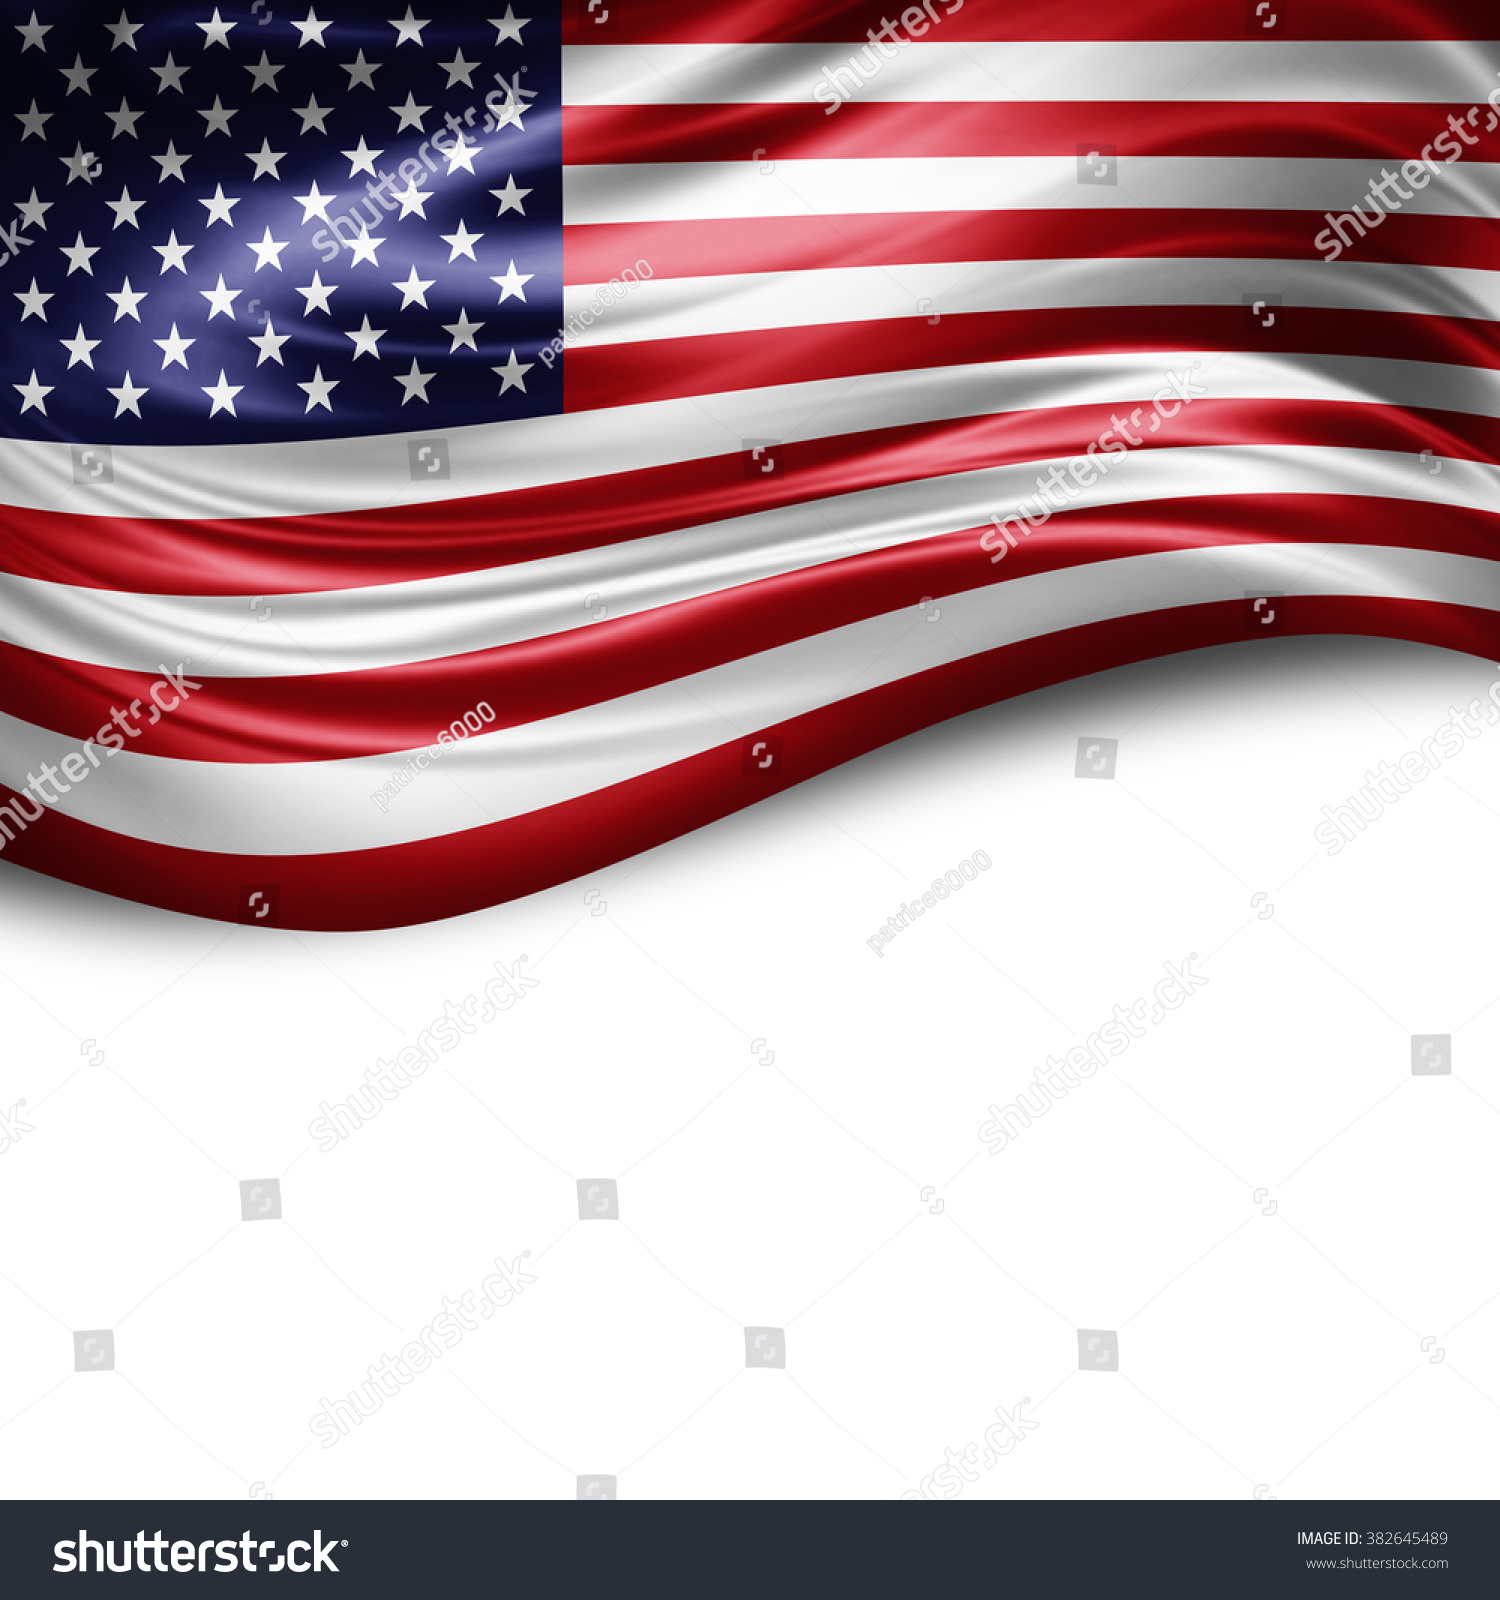 America of silk with copyspace for your text or images and white background #382645489